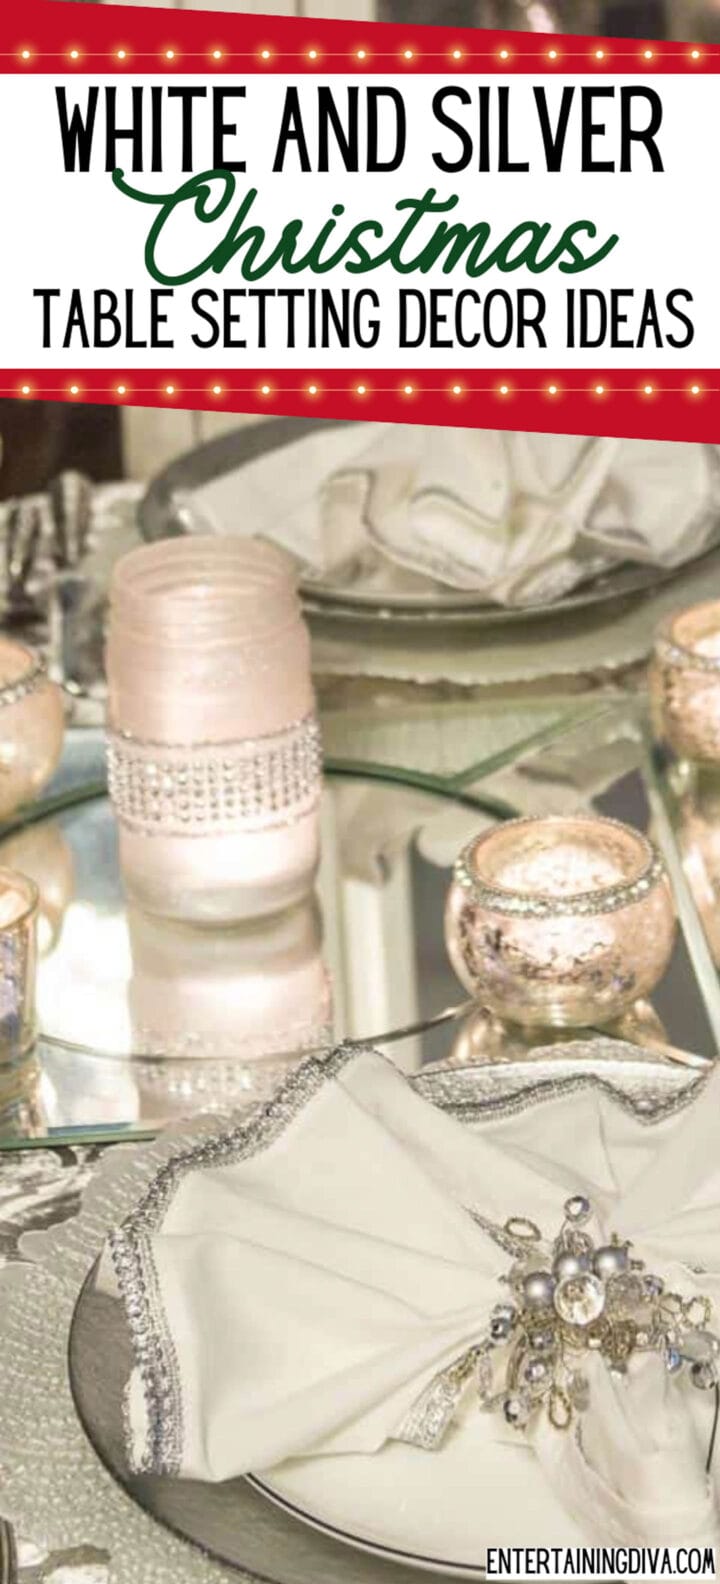 White and Silver Winter Table Setting